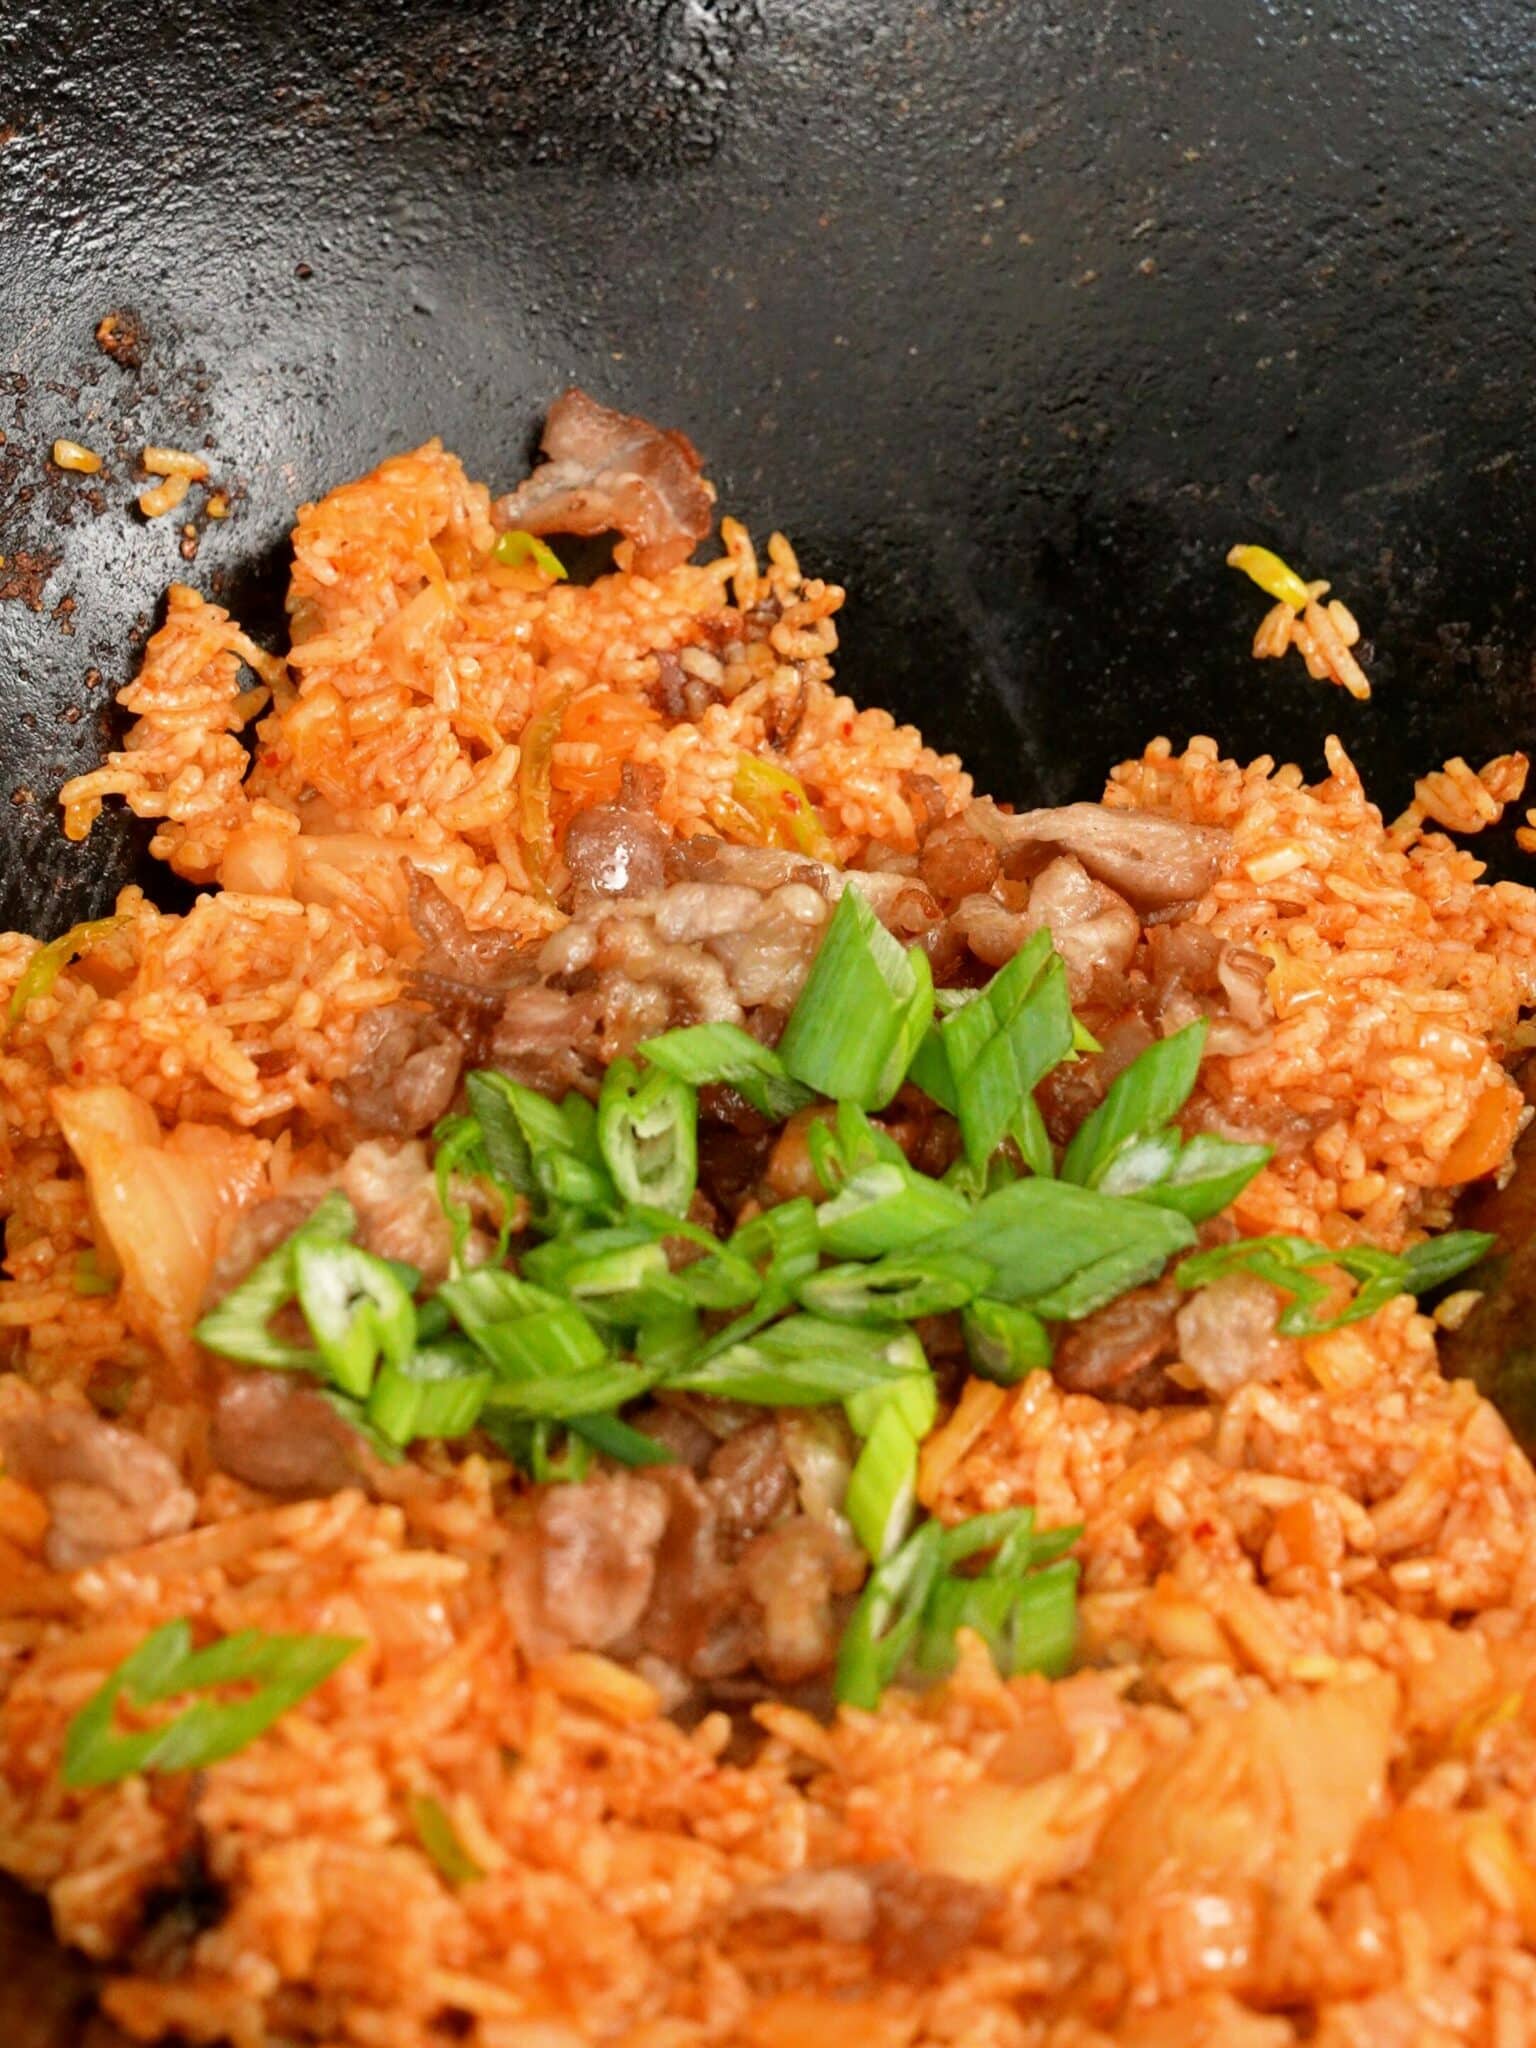 Pork belly and scallions added to kimchi fried rice in a wok.